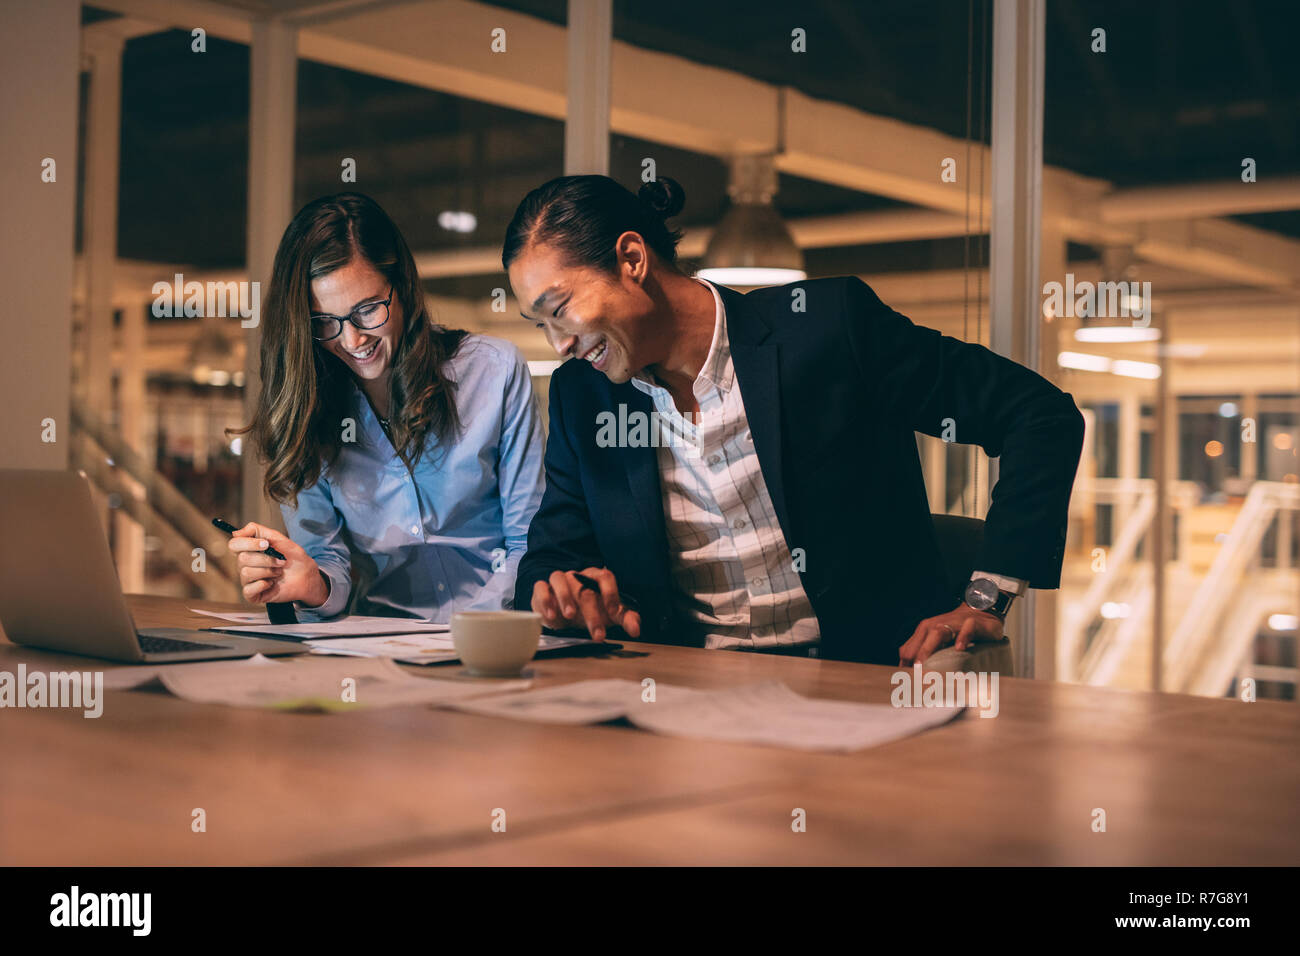 Smiling businessman and woman working together in office late in the night. business people doing work sitting late in office. Stock Photo